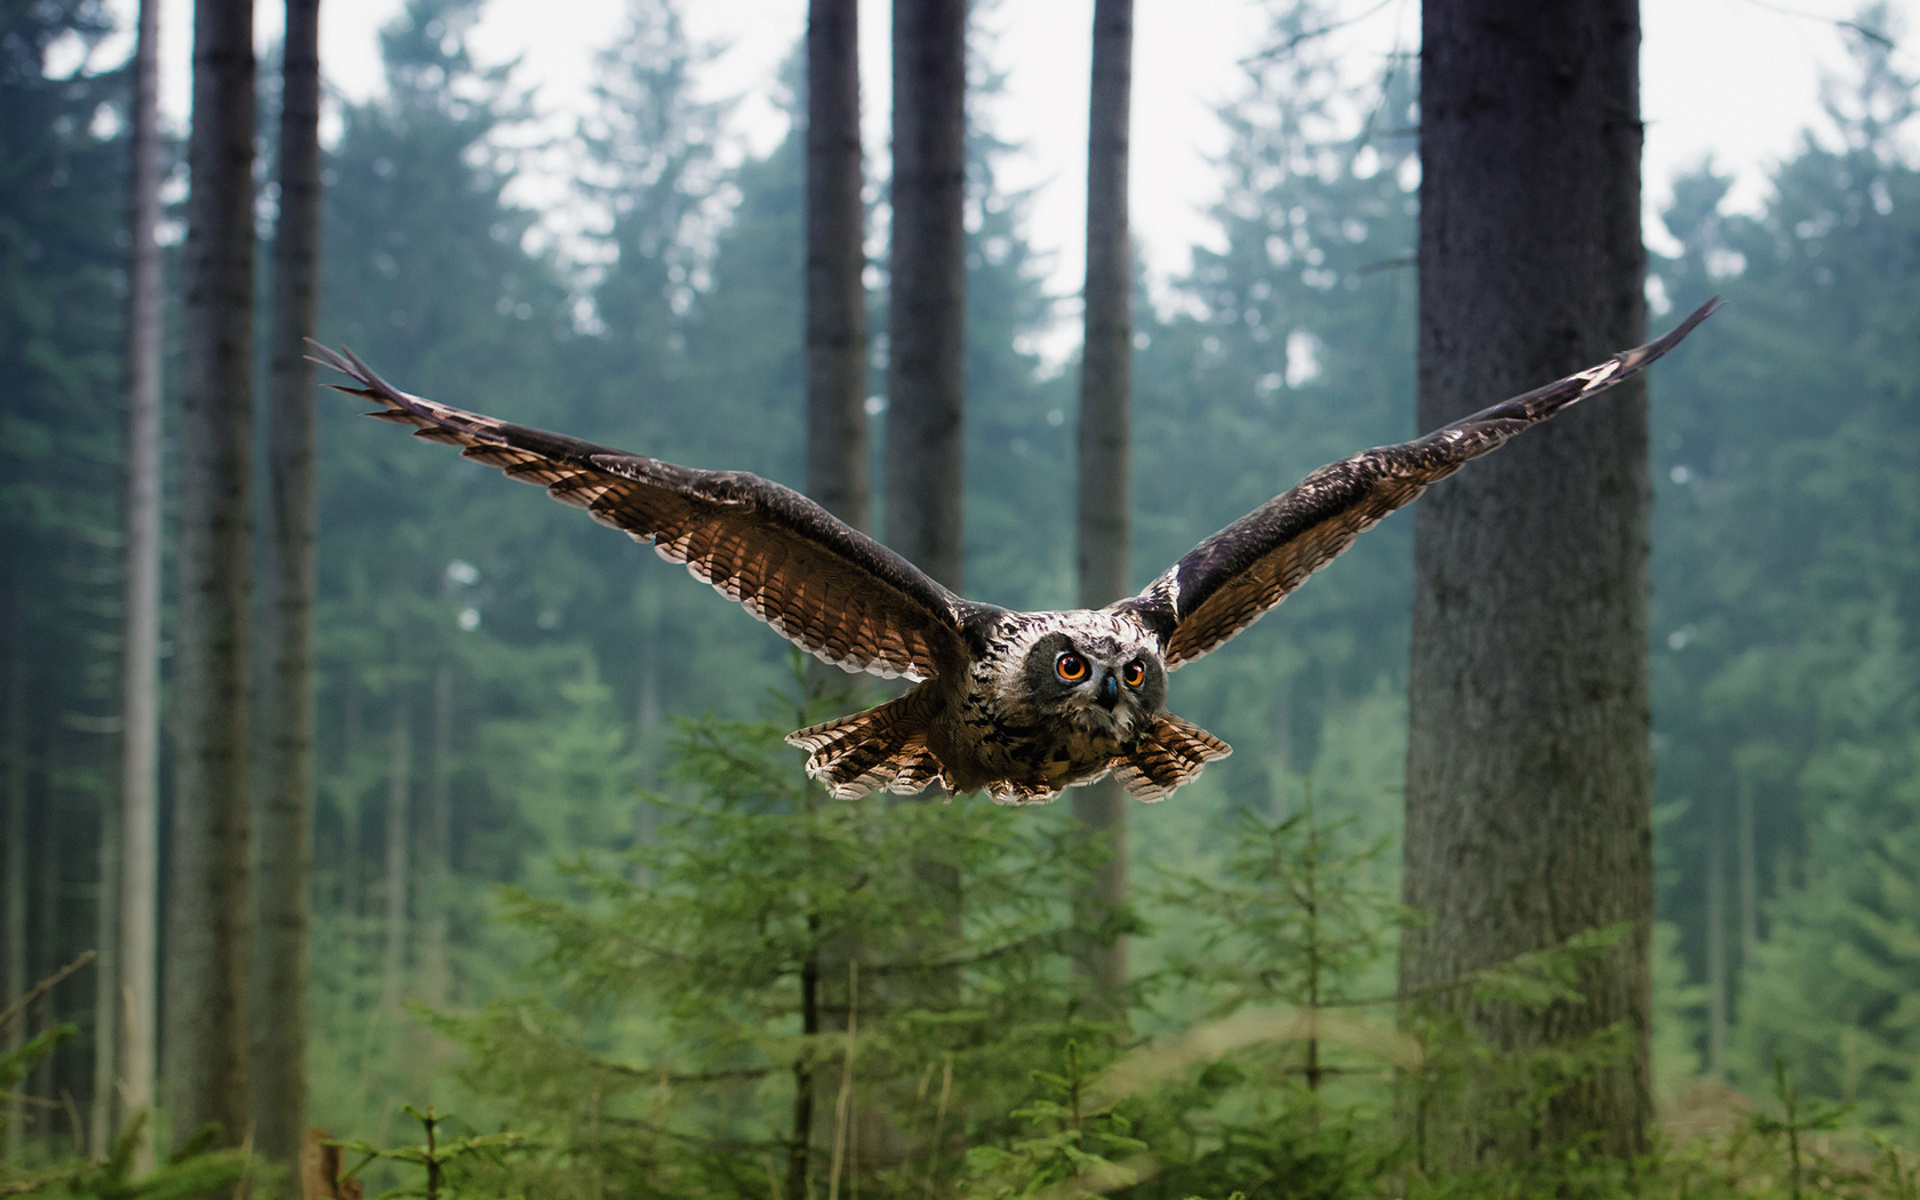 owls, Animals, Birds, Wildlife, Predator, Wings, Feathers, Flight, Fly, Air, Nature, Landscapes, Trees, Forest Wallpaper